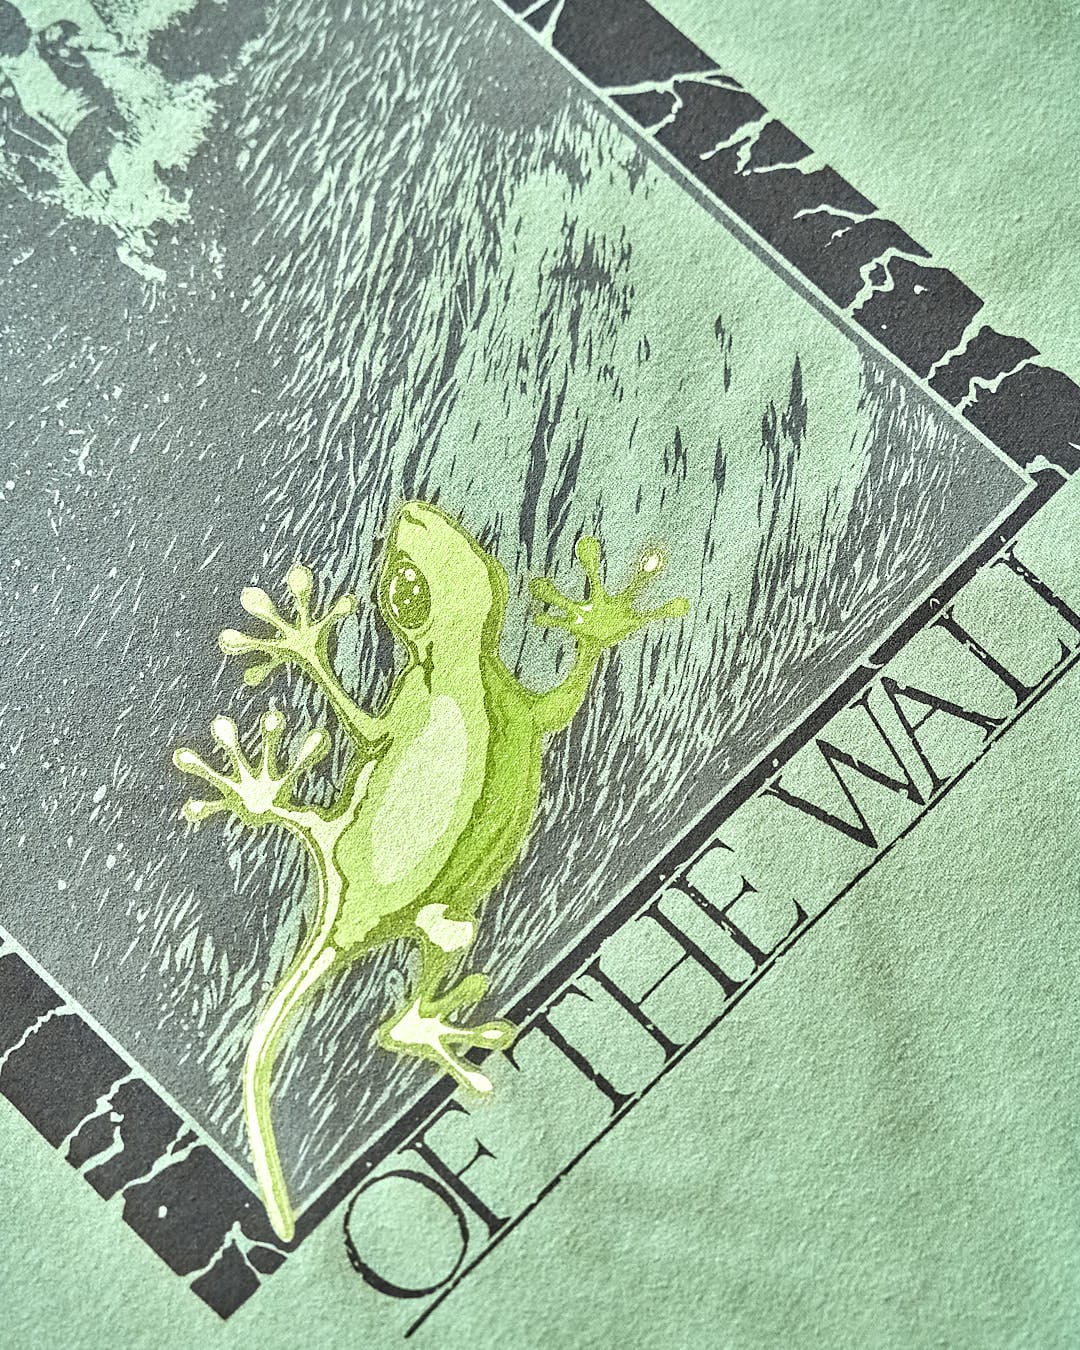 A "Little Creatures - Limited Edition 35 Years T-Shirt" with a lizard on it.